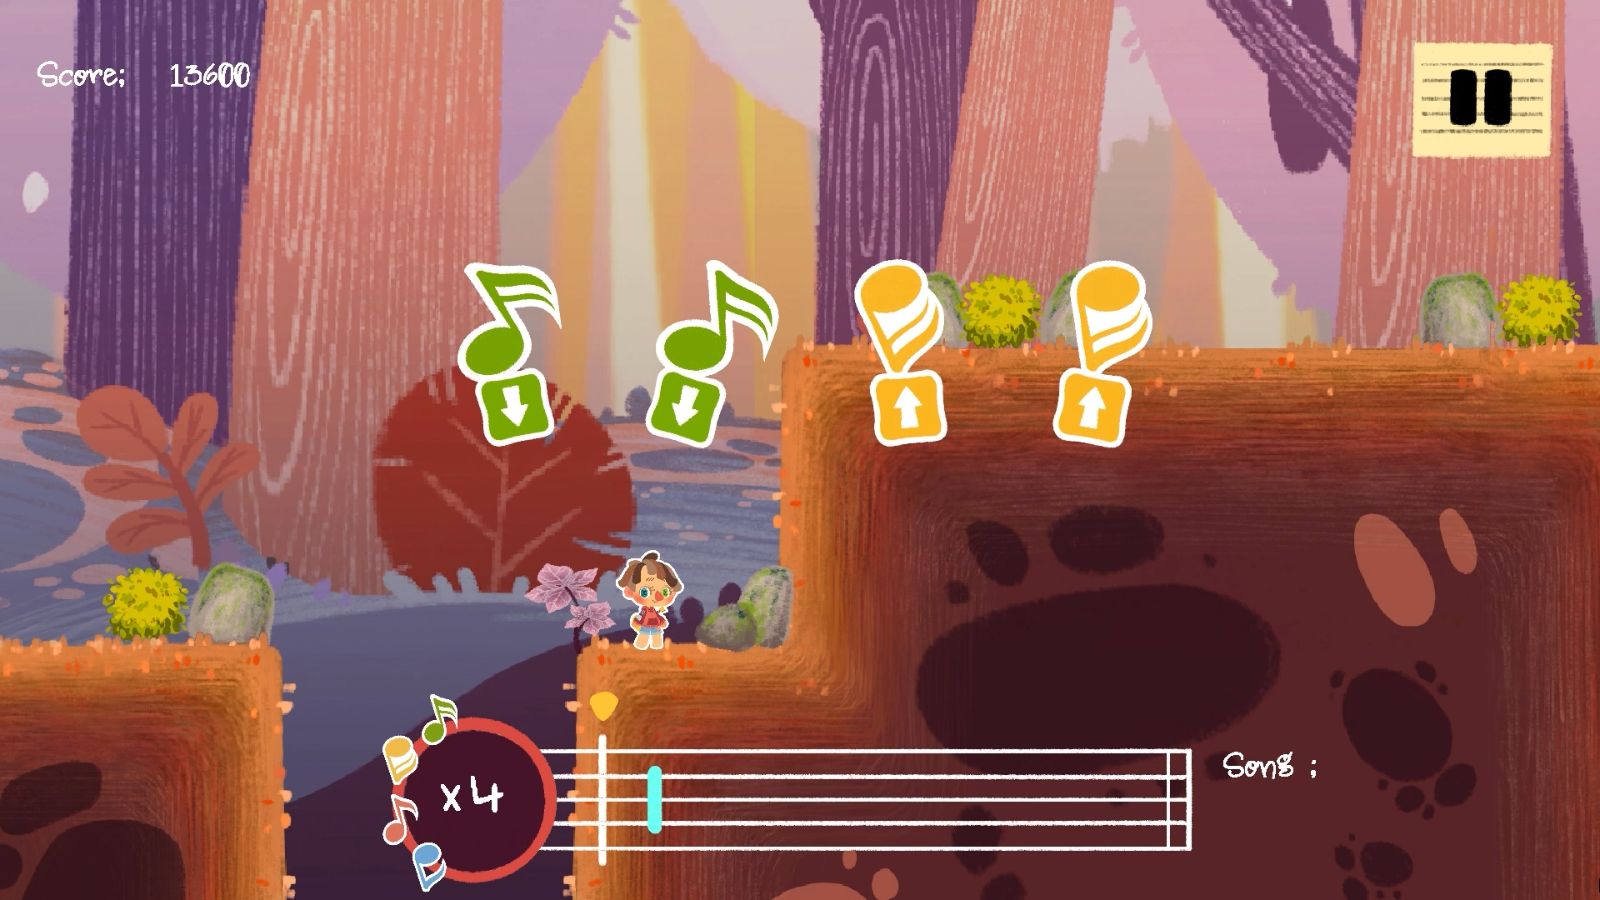 The protagonist, Brio, prepares to jump up a cliff while the player is prompted to play corresponding notes.